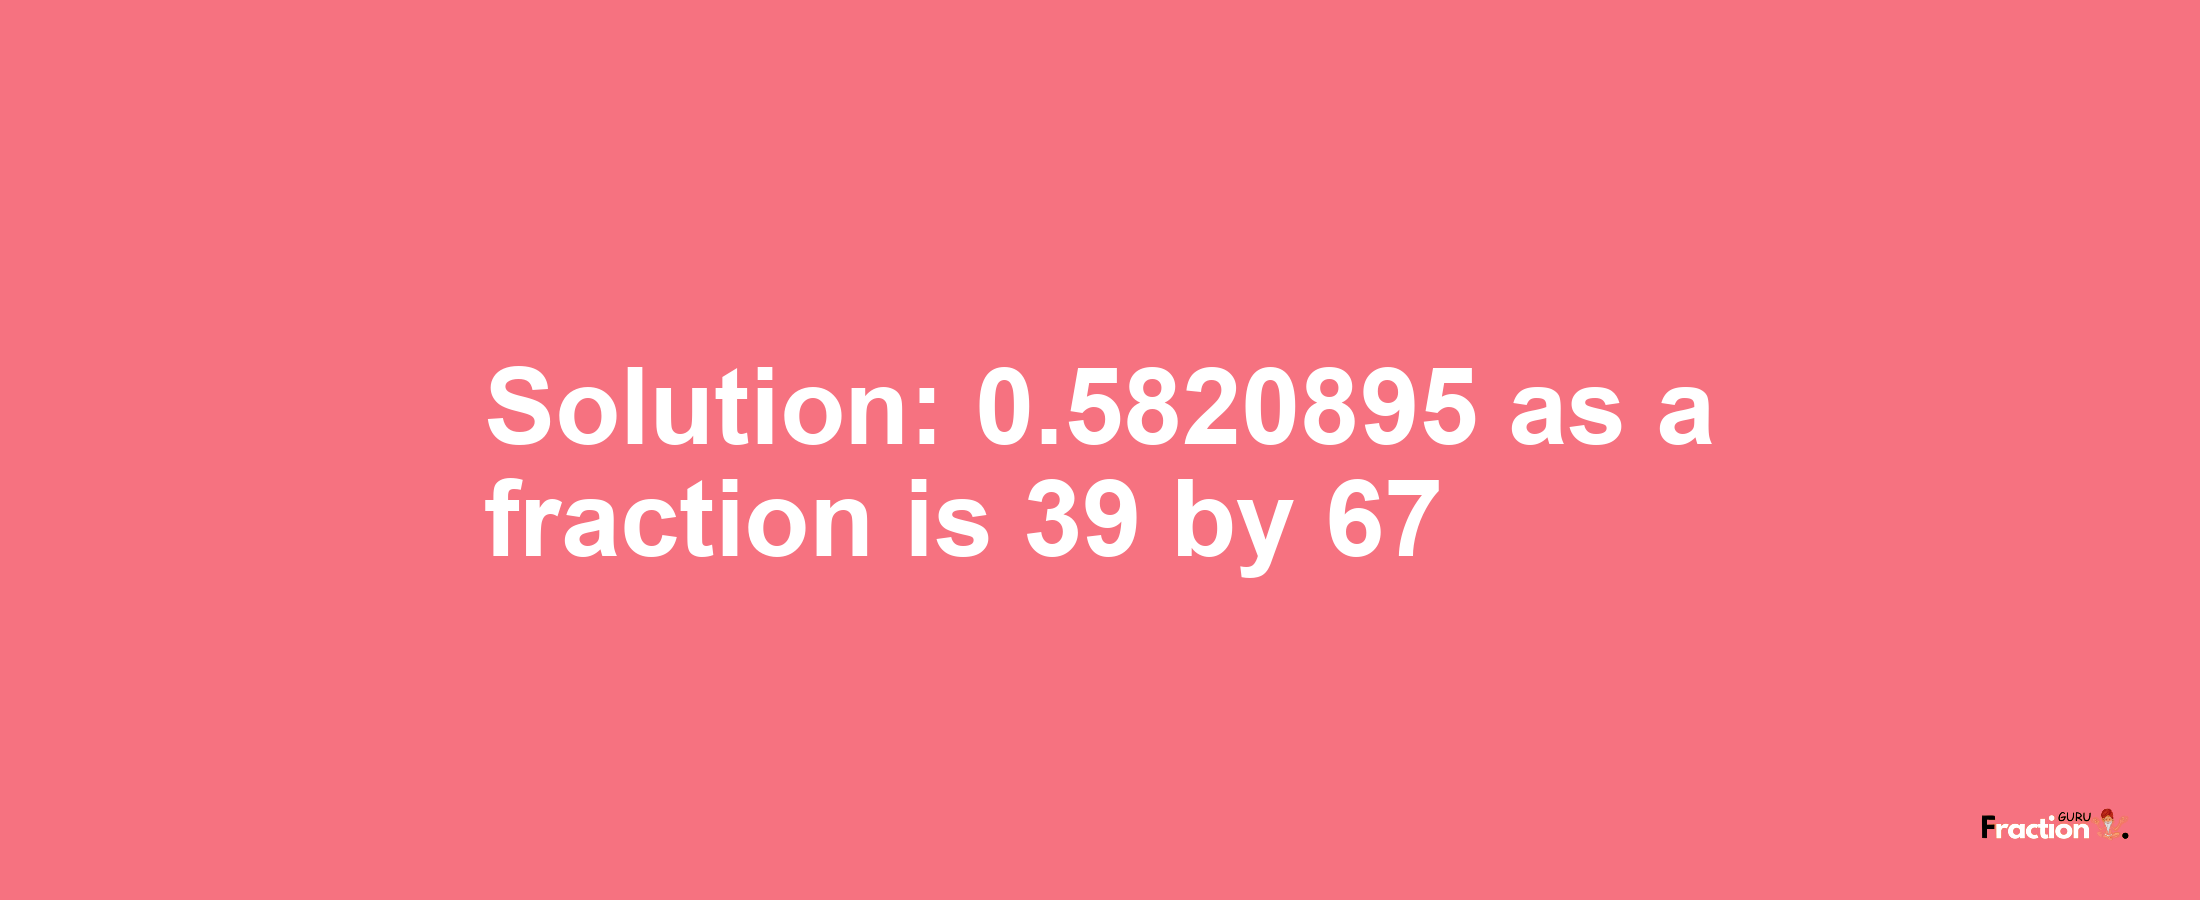 Solution:0.5820895 as a fraction is 39/67